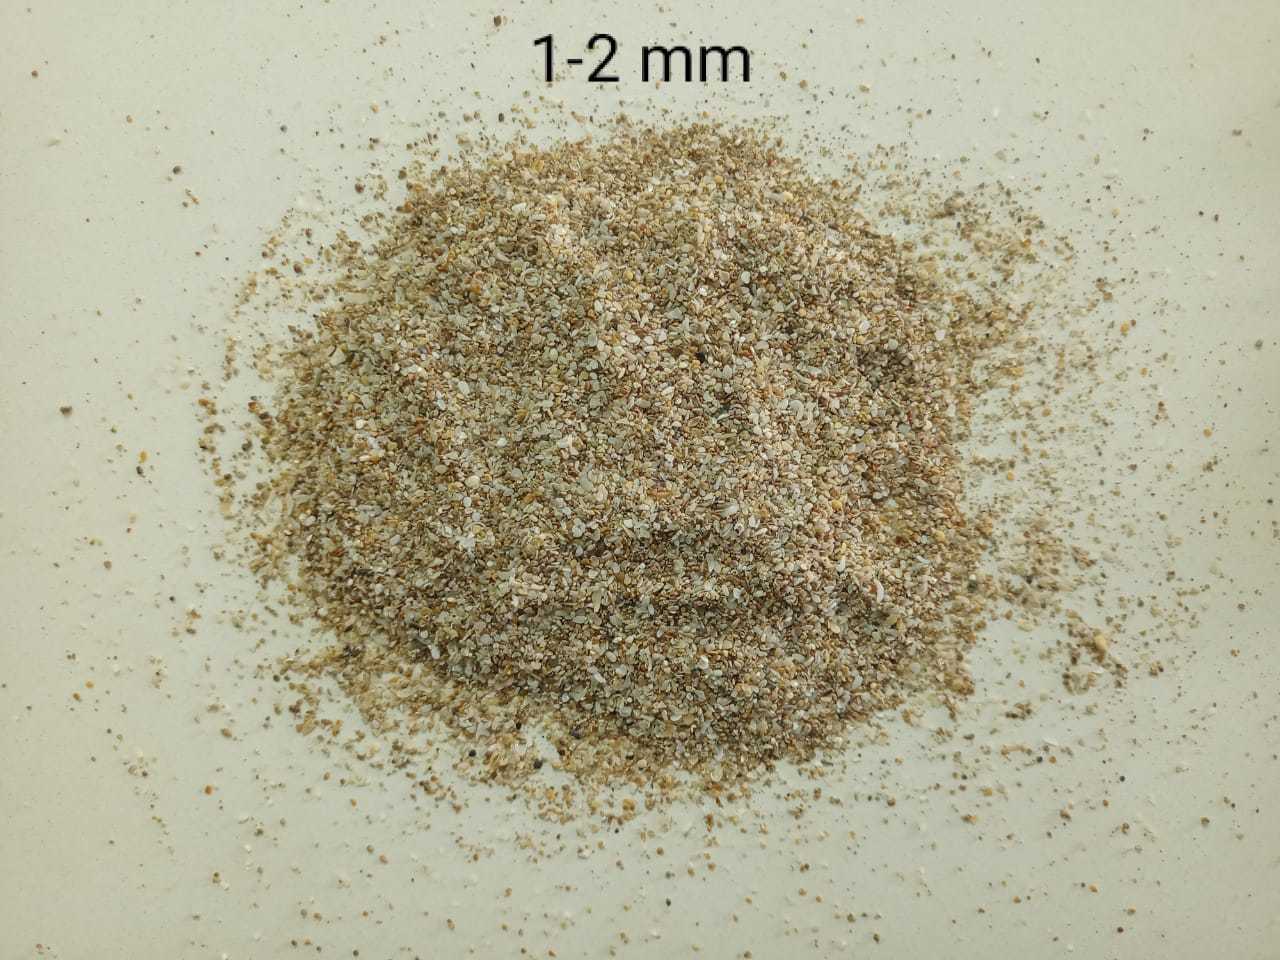 bulk export Natural Crushed Sea Shell Sand and Chips